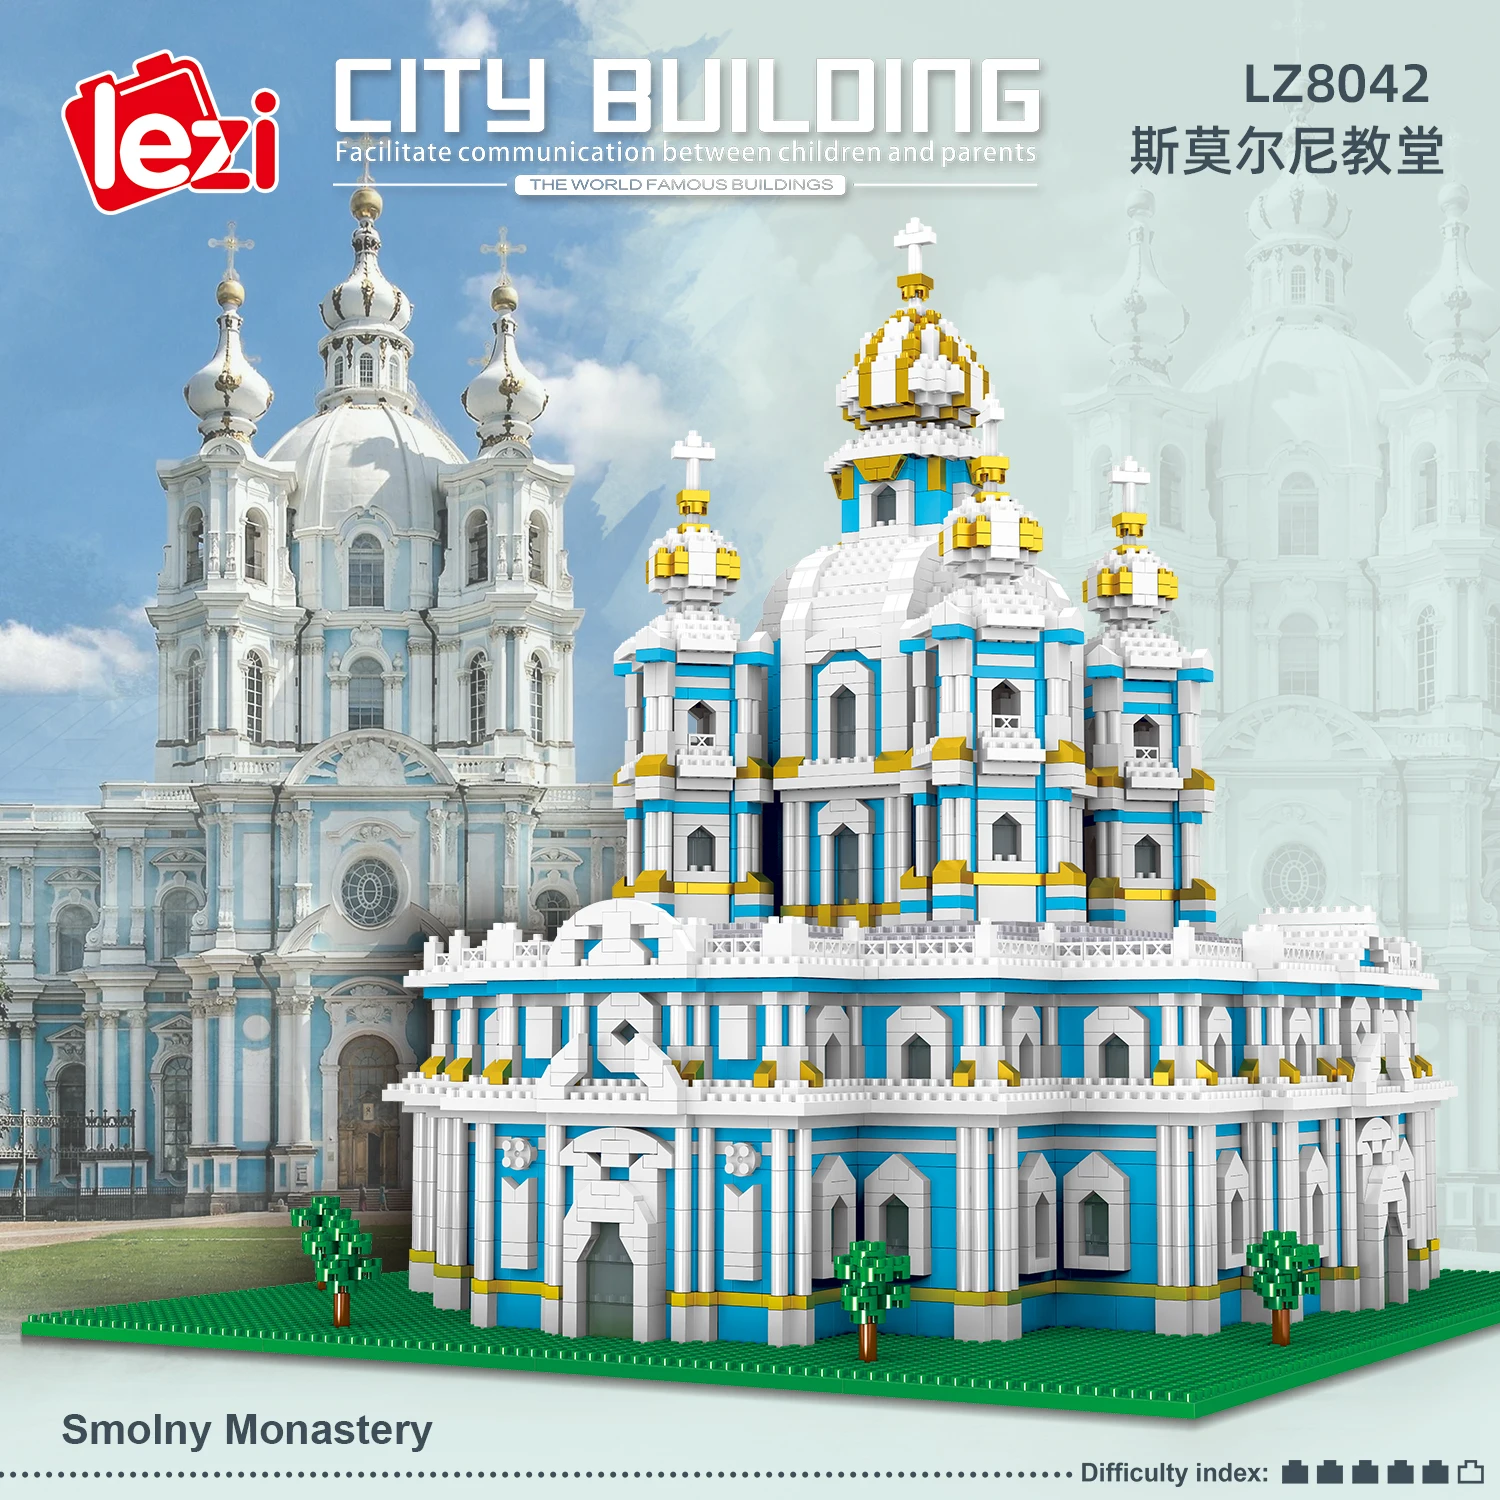 

Smalley Church Architecture Building Set Model Kit STEAM Construction Toy Gift for Kids and Adults (3737 PCS)